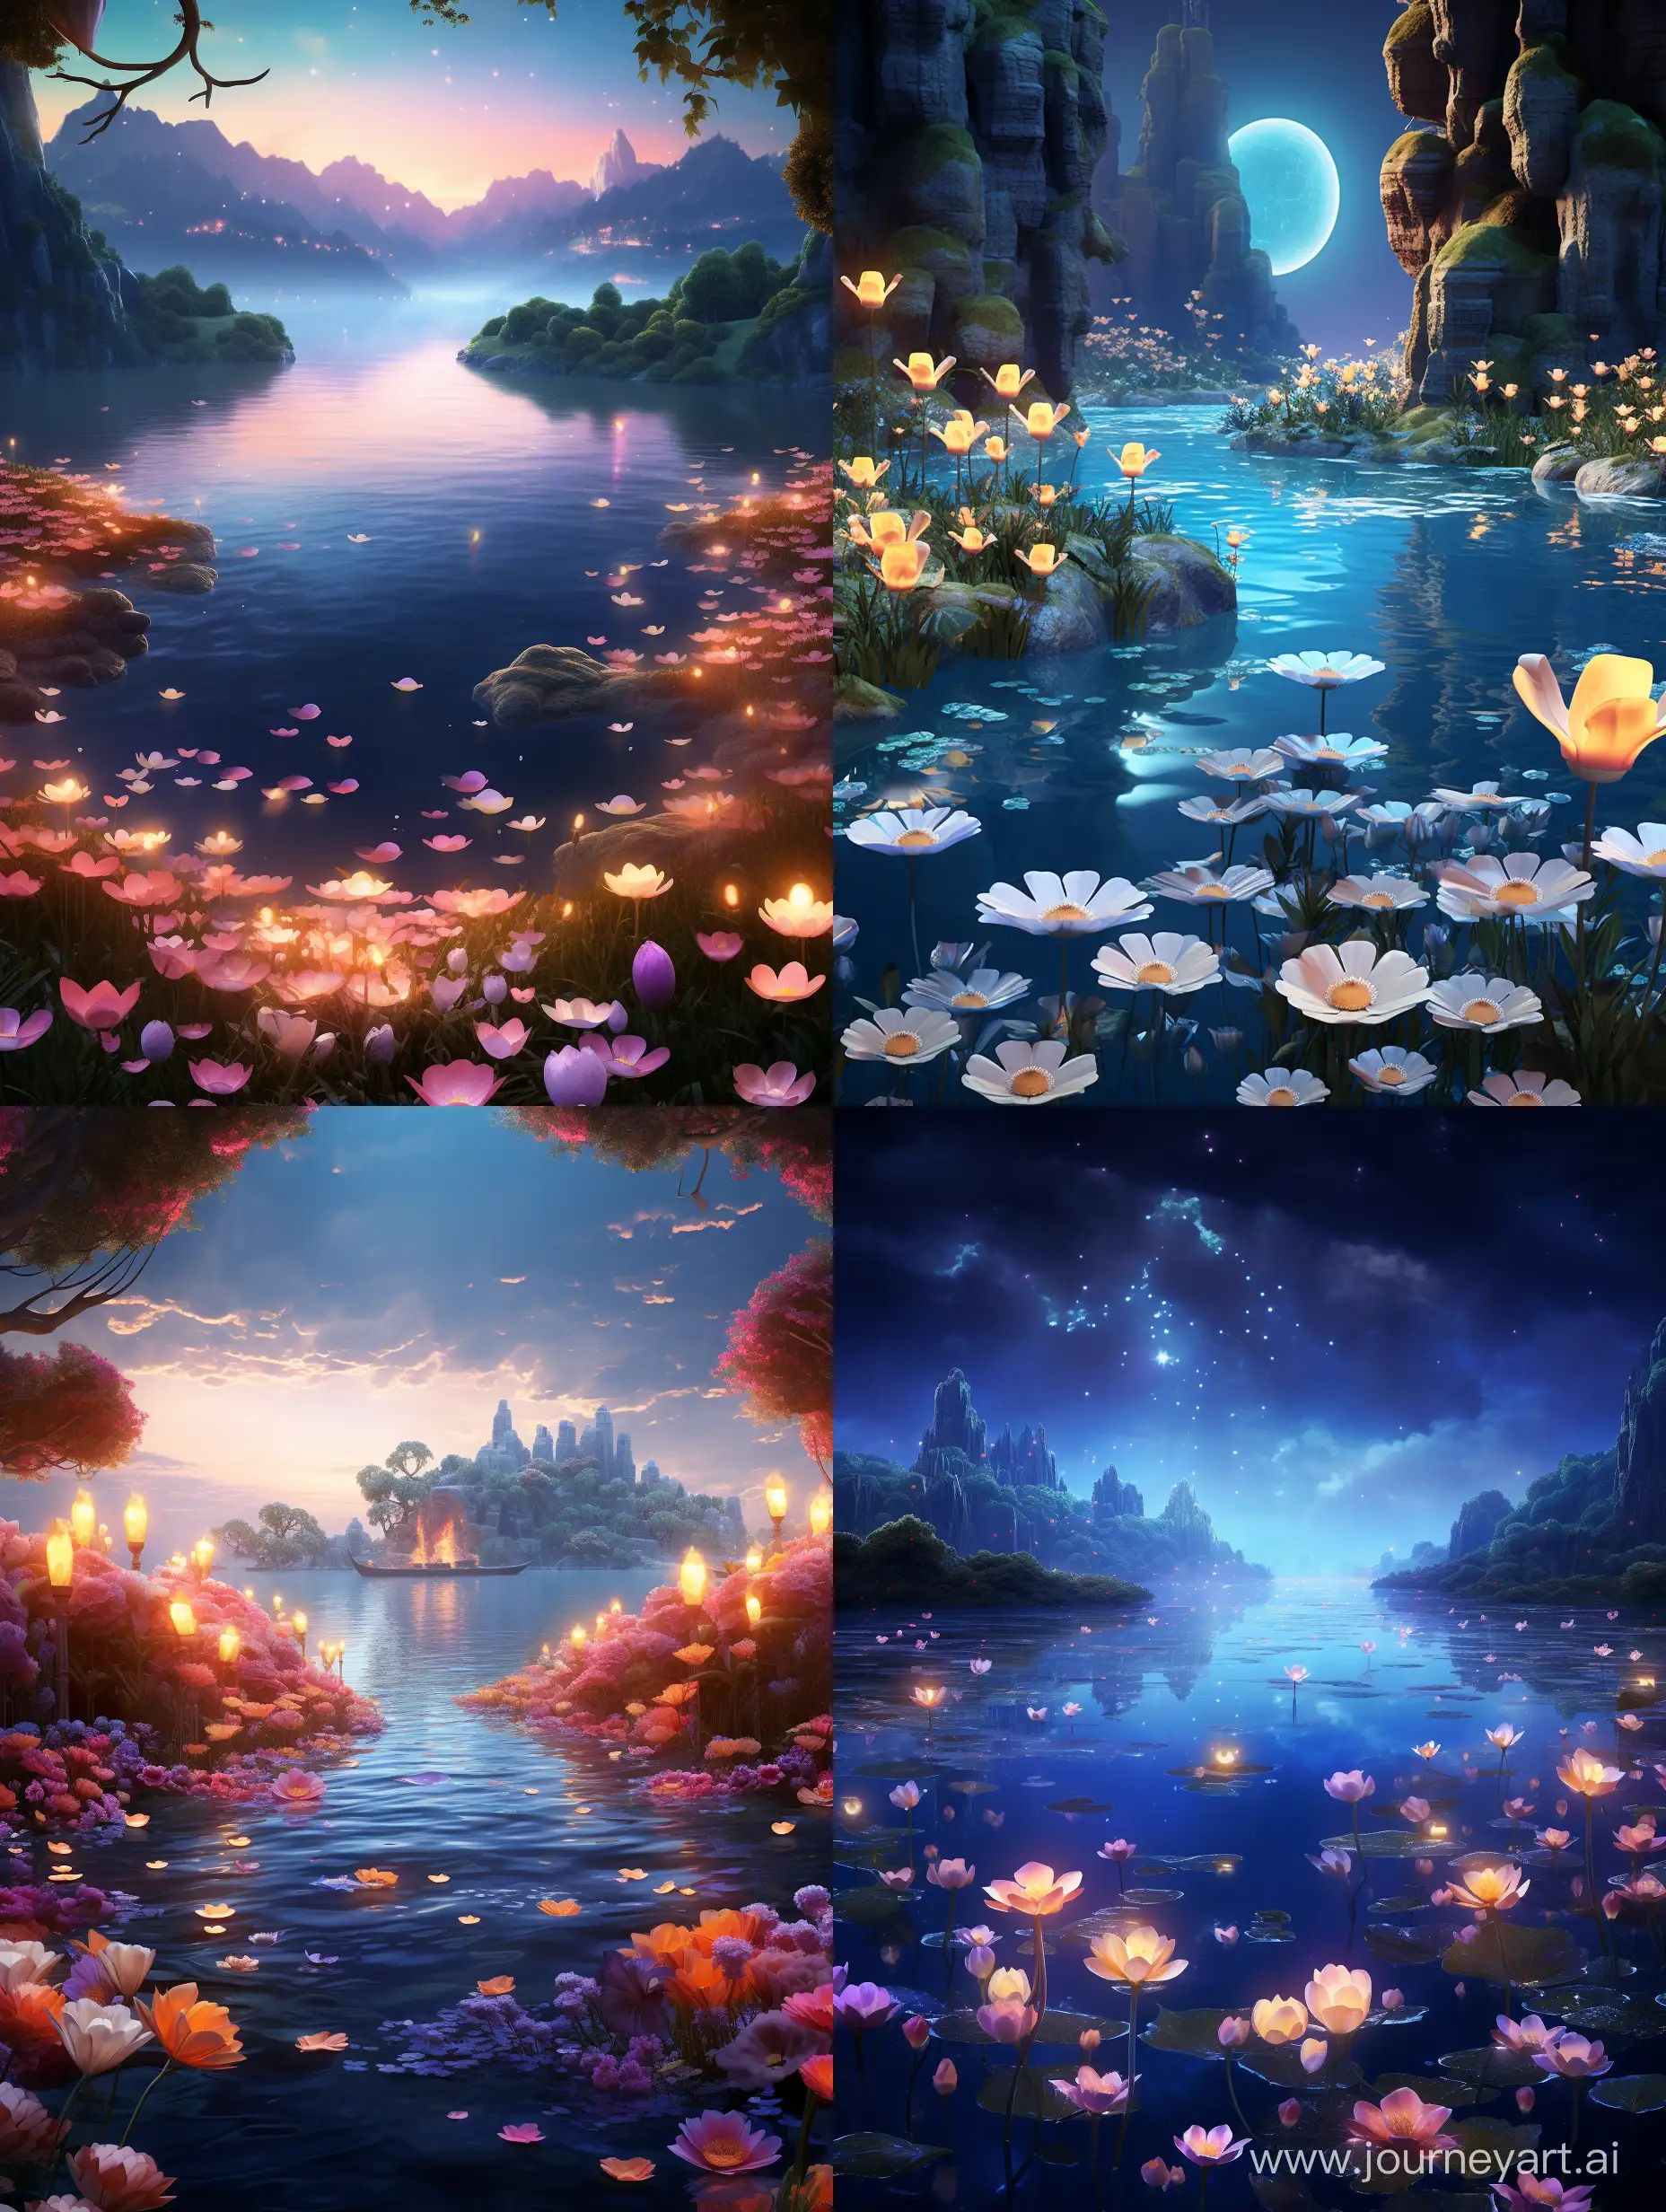 Visualize a serene lake surrounded by floating islands, each adorned with glowing flowers that dance with the breeze.